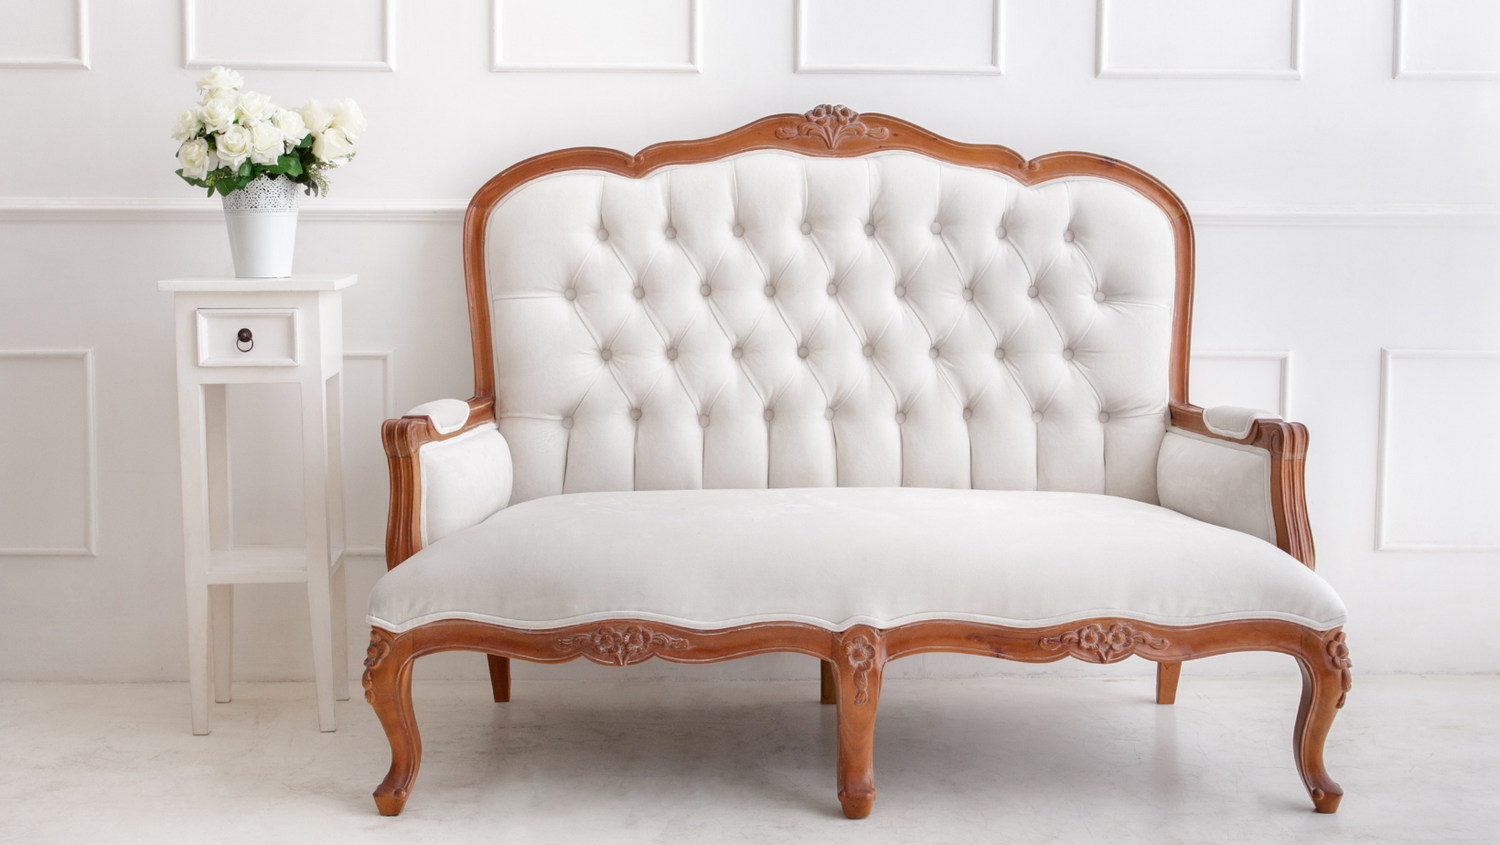 How to Care for Your Upholstered Furniture